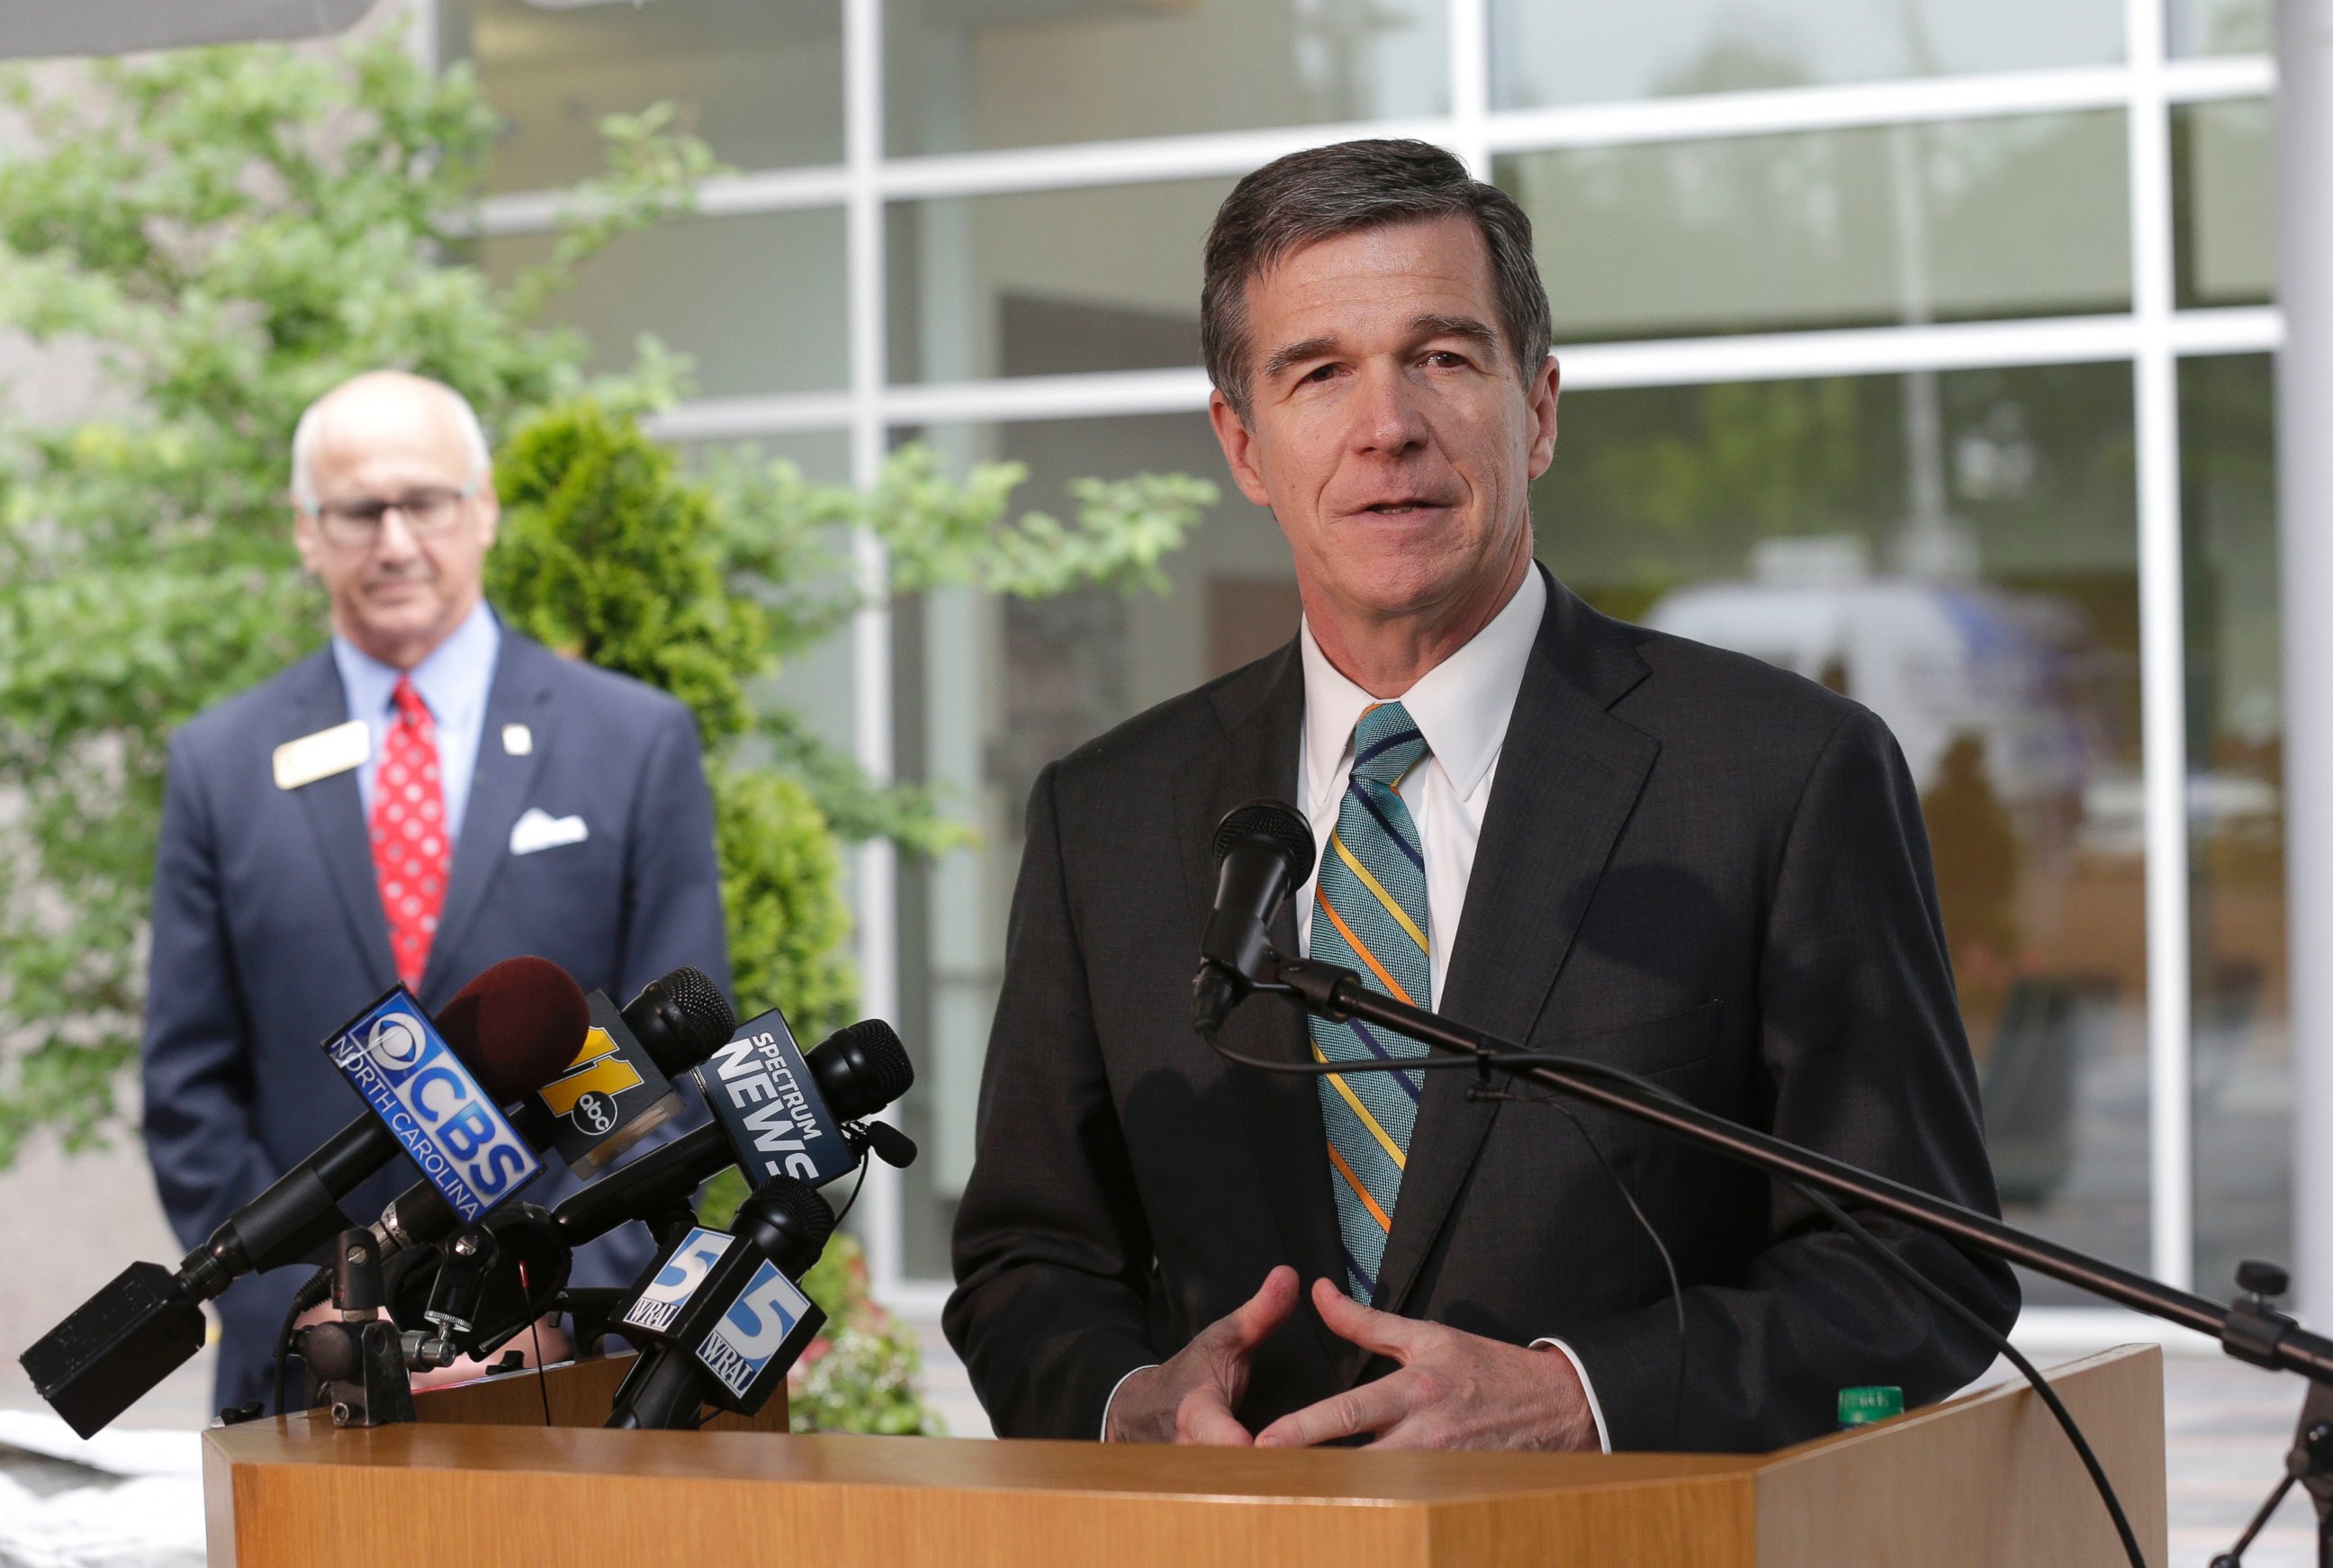 PHOTO: North Carolina Gov. Roy Cooper makes remarks during a news conference at Credit Suisse in Morrisville, N.C., May 9, 2017.